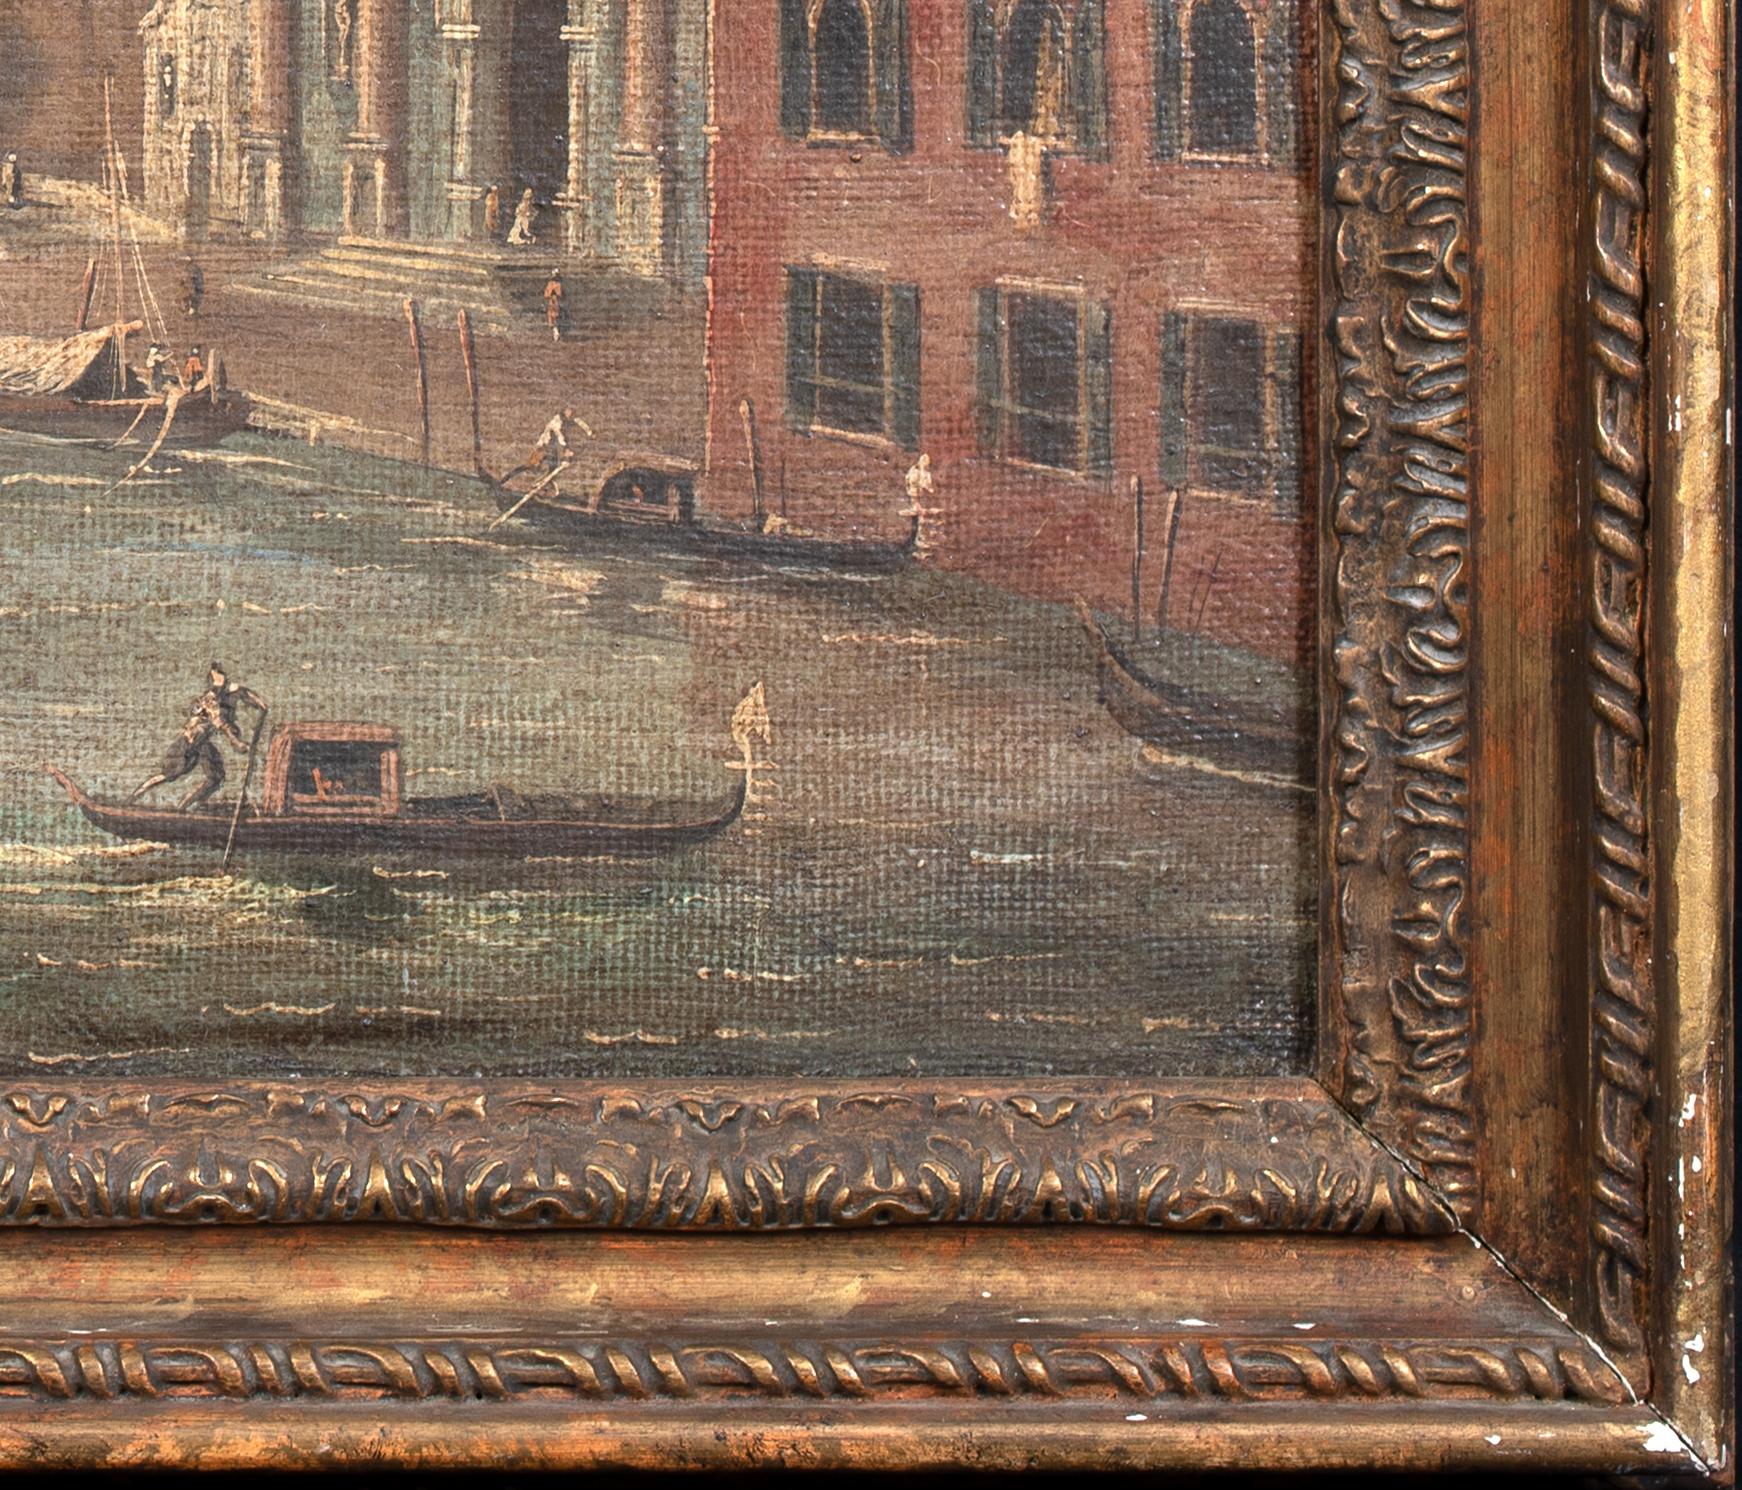 View Of Venice, 19th Century

follower of Michele Giovanni MARIESCHI (1696-1743)

Large 19th Century Italian School view of a venetian canal, oil on canvas. Good quality and condition view capturing the waterways and architectural detail. Typical of